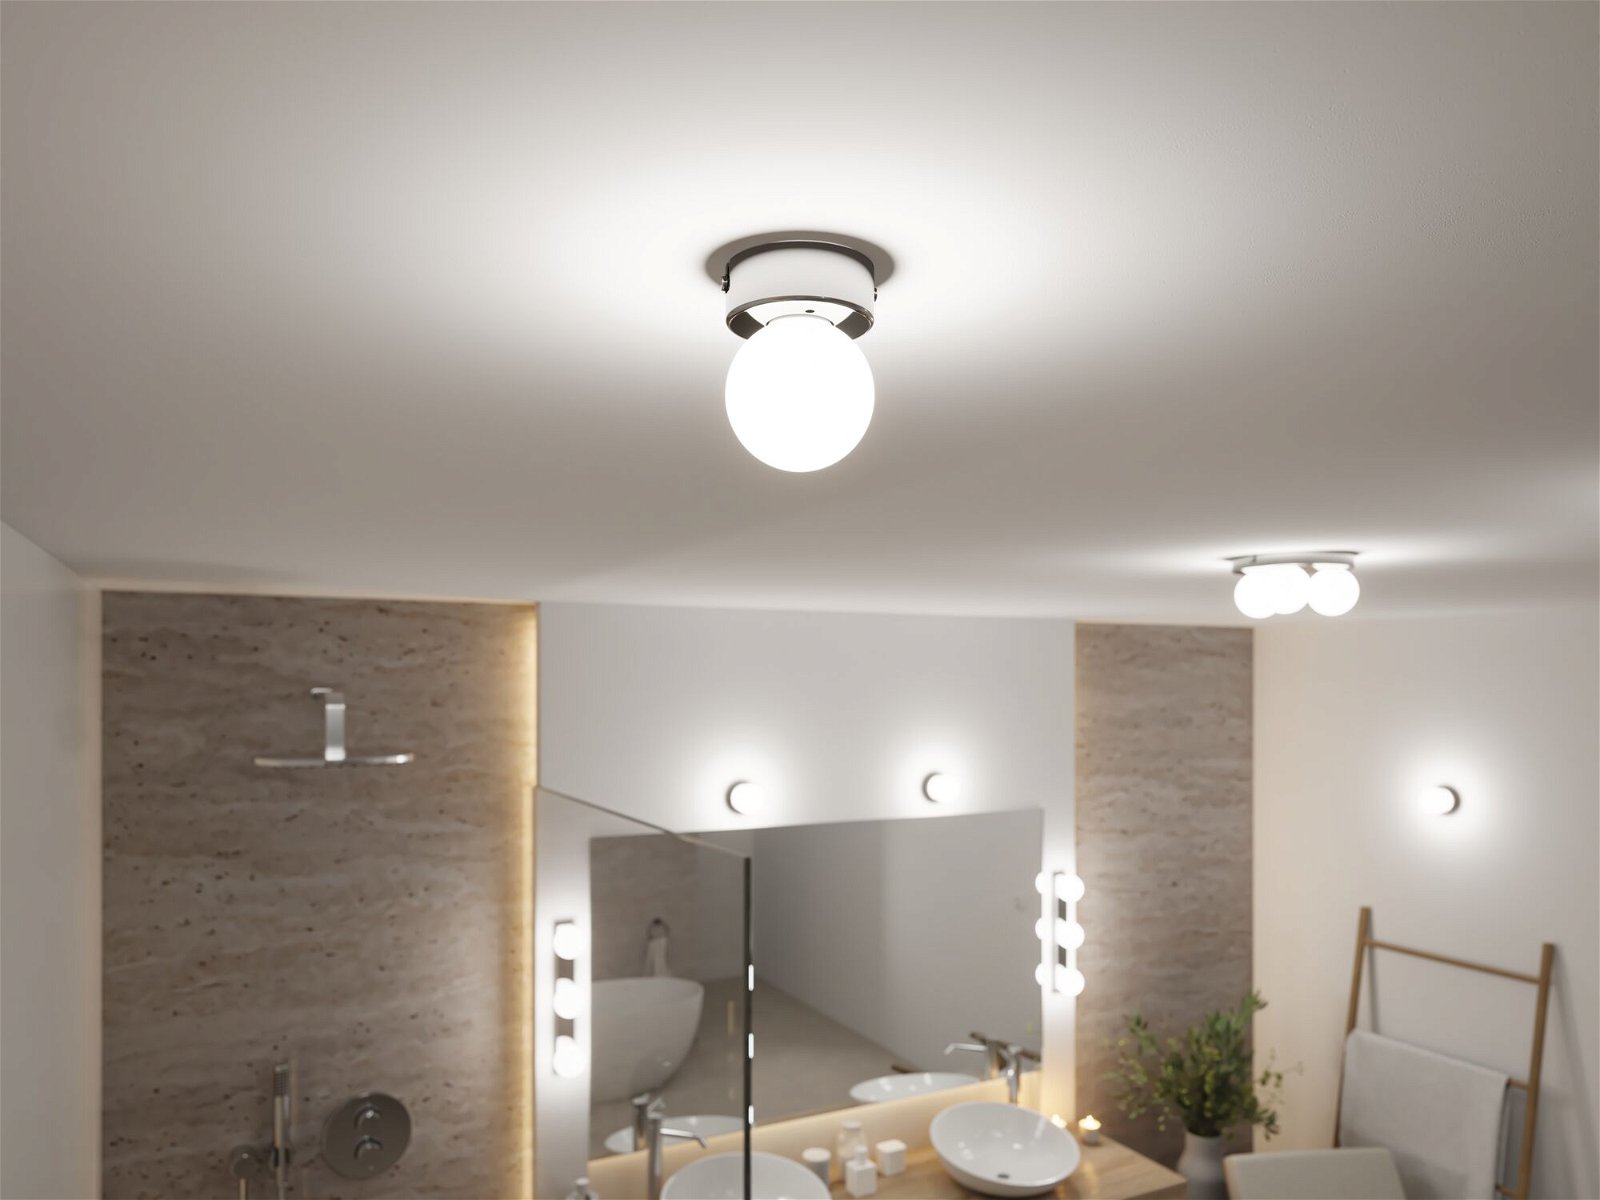 Selection Bathroom Ceiling luminaire Gove IP44 G9 230V max. 20W dimmable Chrome/Satin